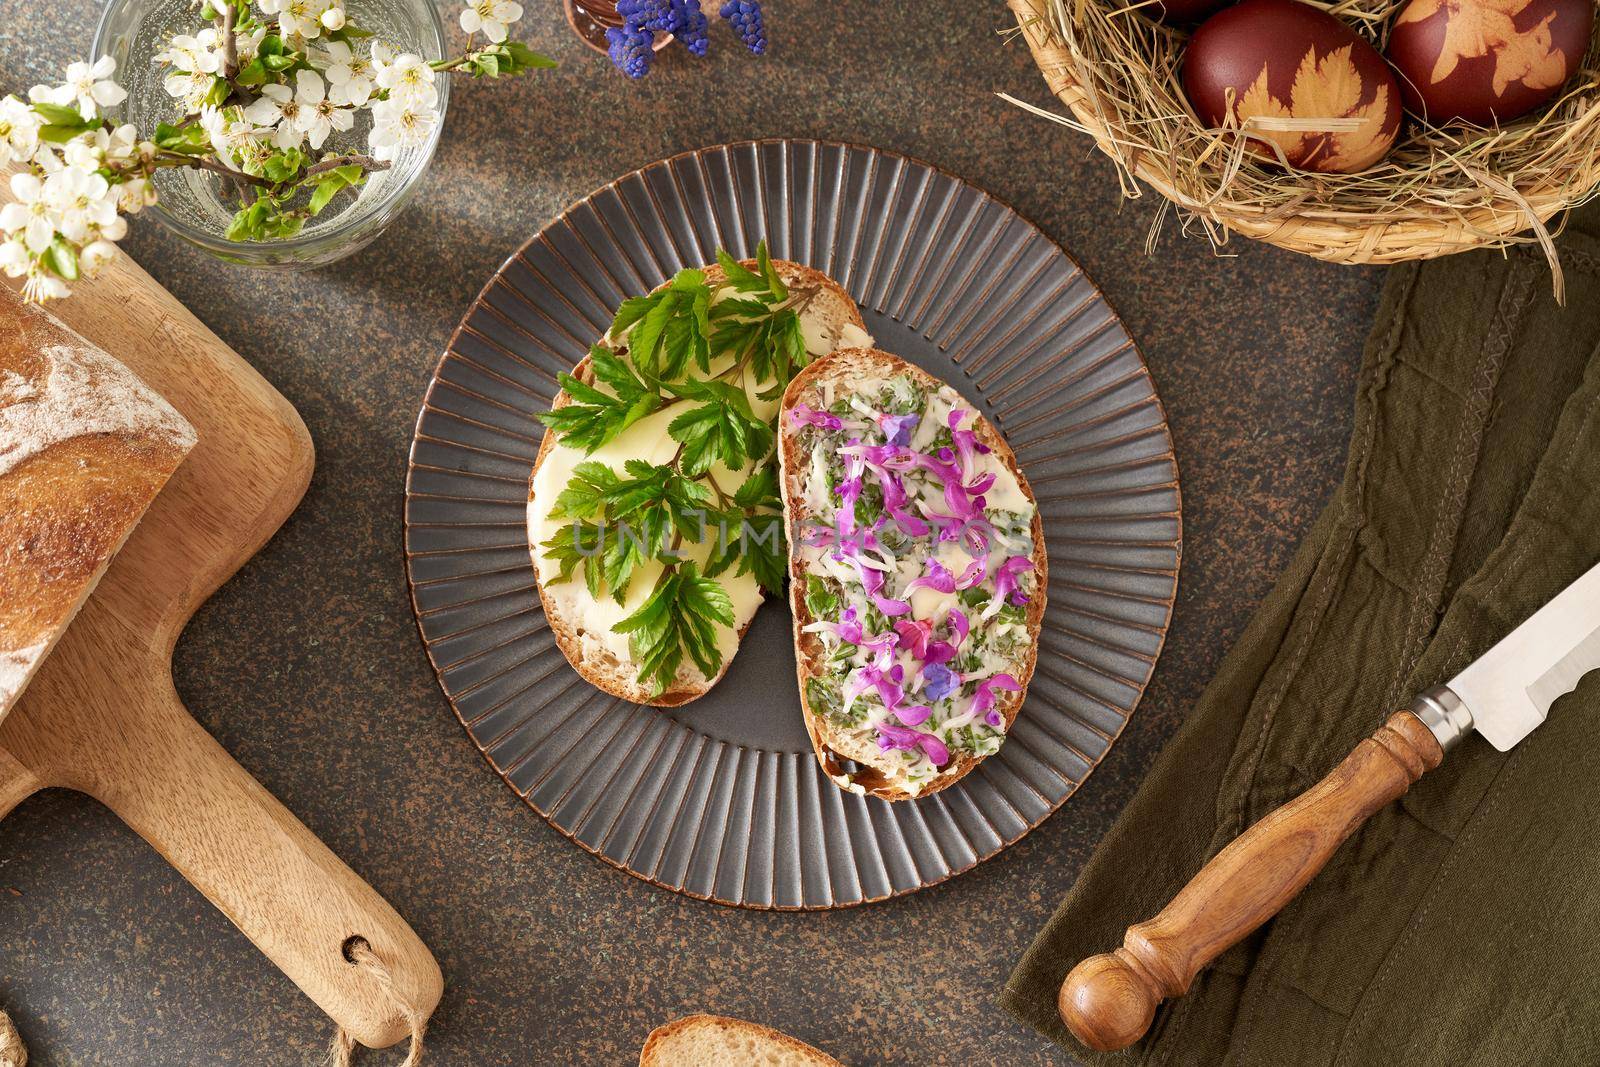 Sourdough bread with butter and wild edible spring plants - goutweed leaves, purple dead-nettle and lungwort by madeleine_steinbach